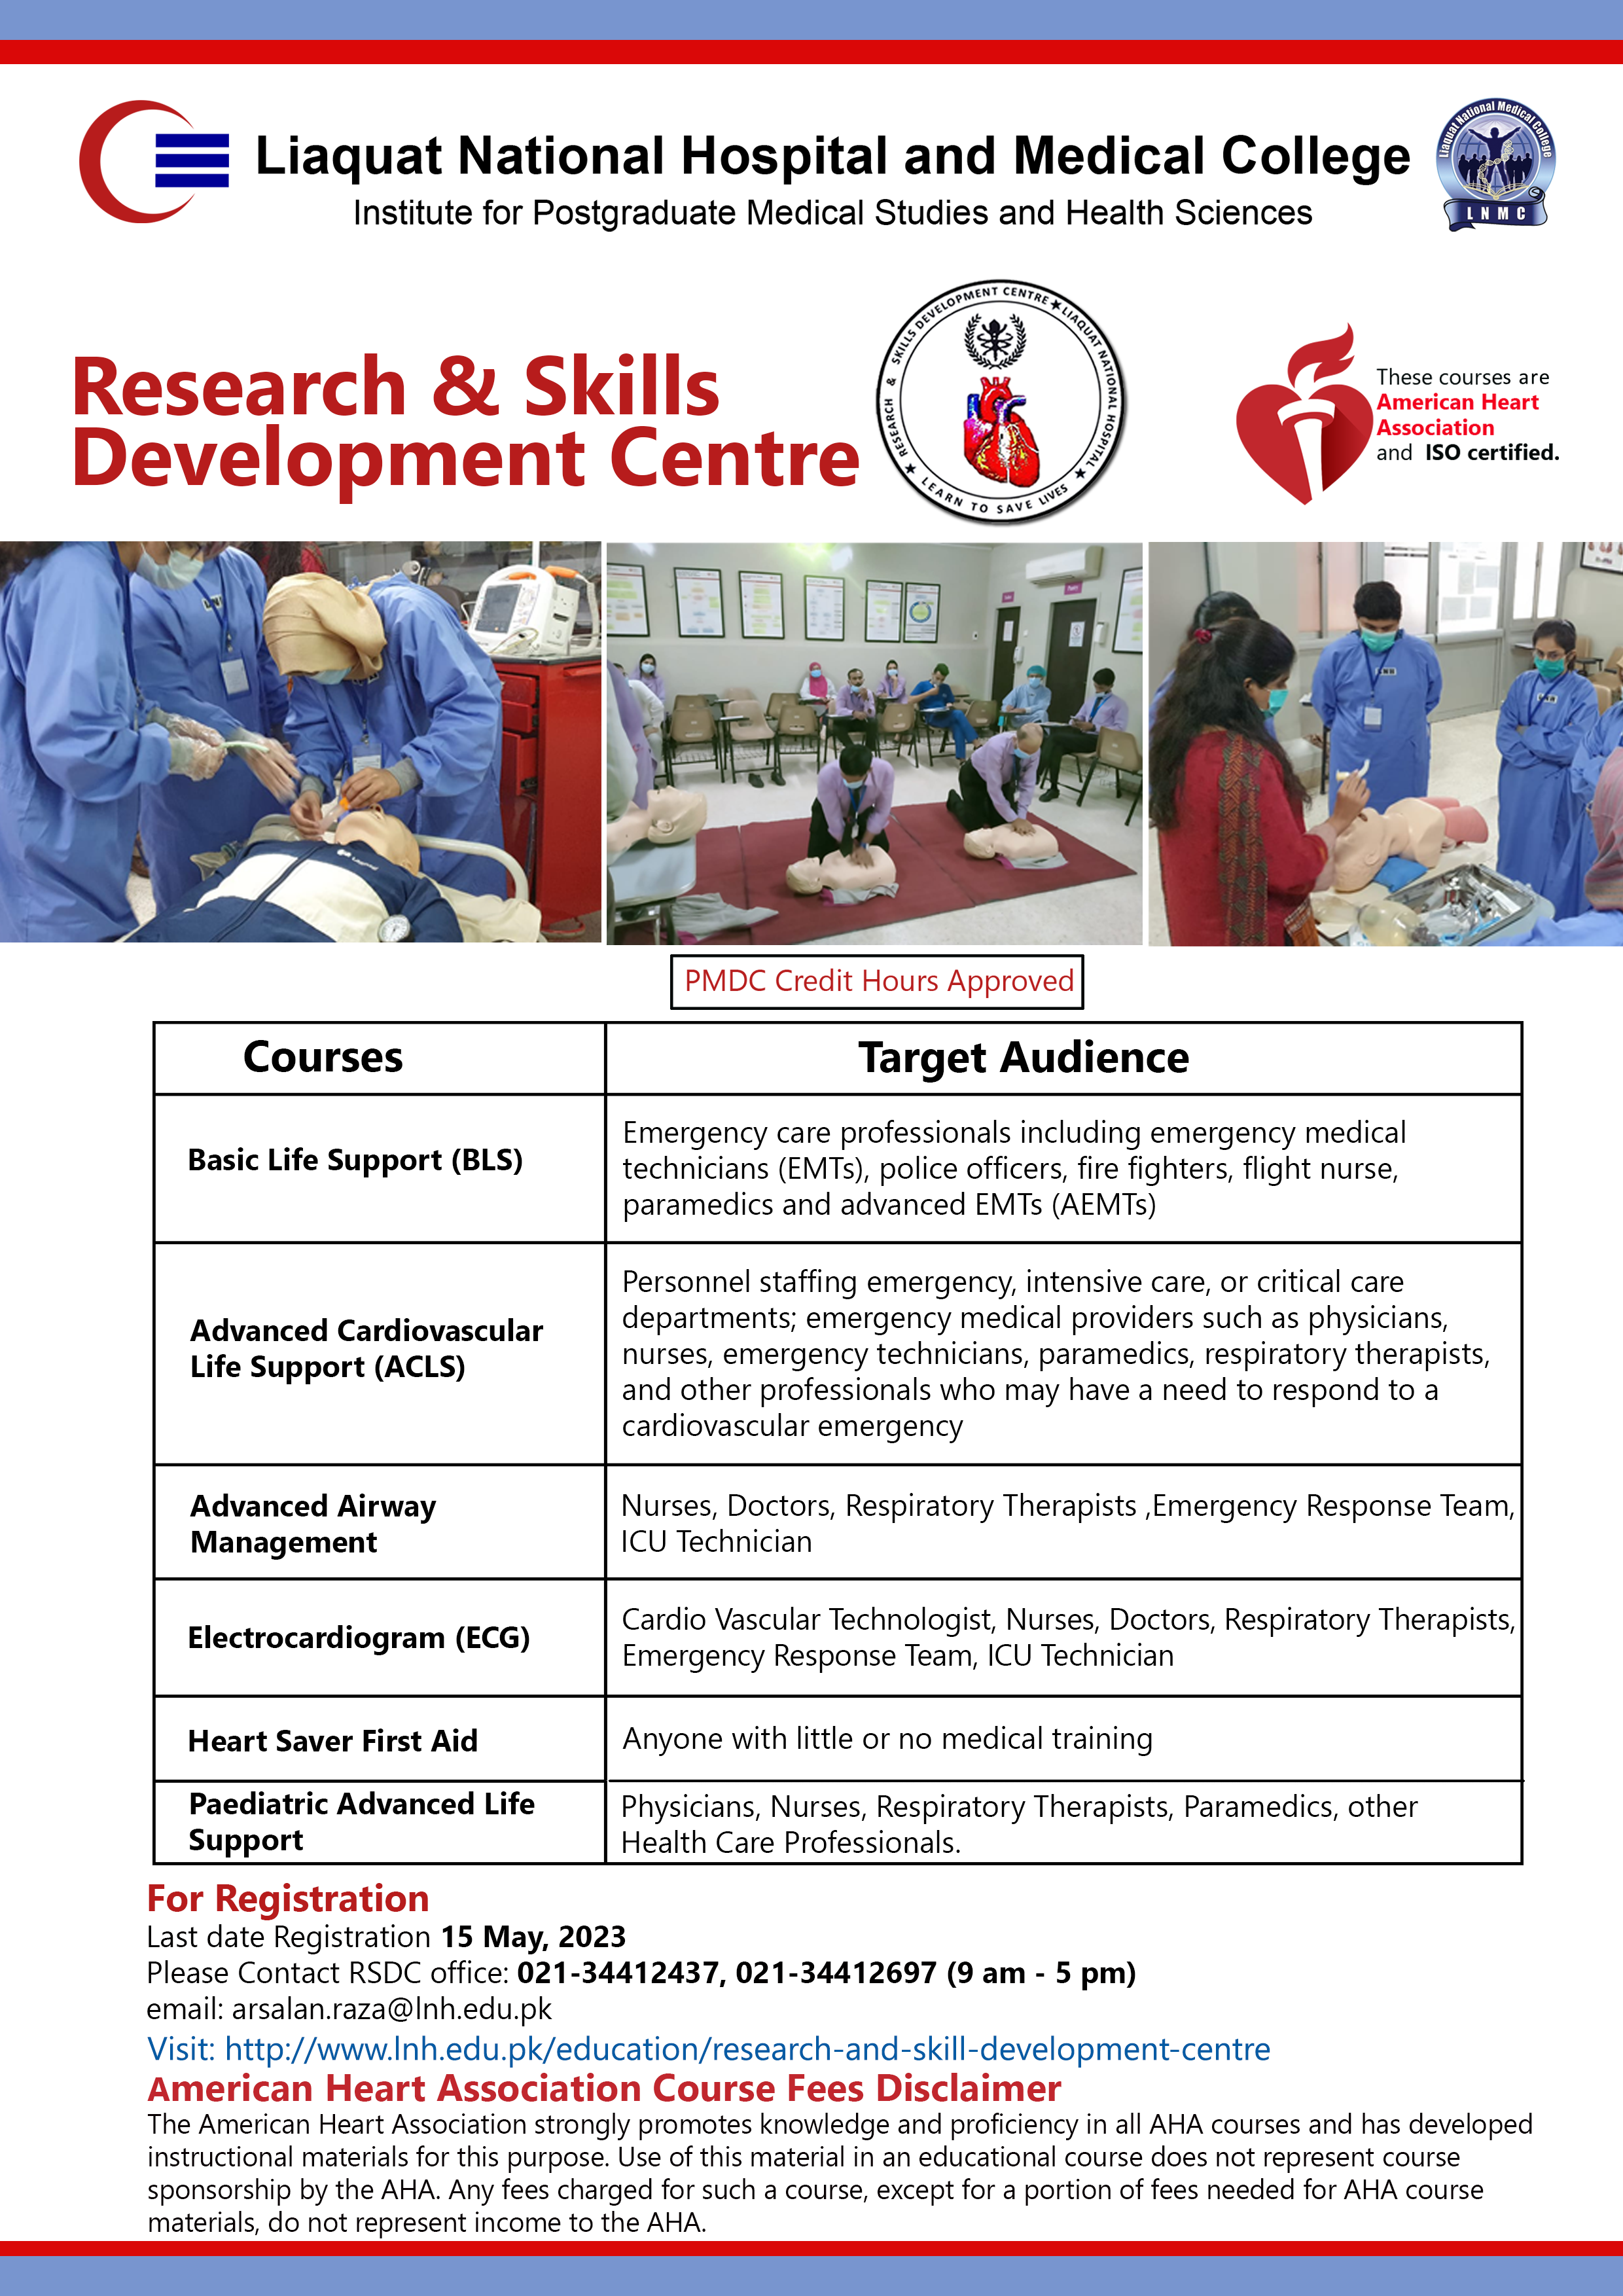 Skills Development Courses (AHA and ISO Certified; PMDC approved Credit Hours)